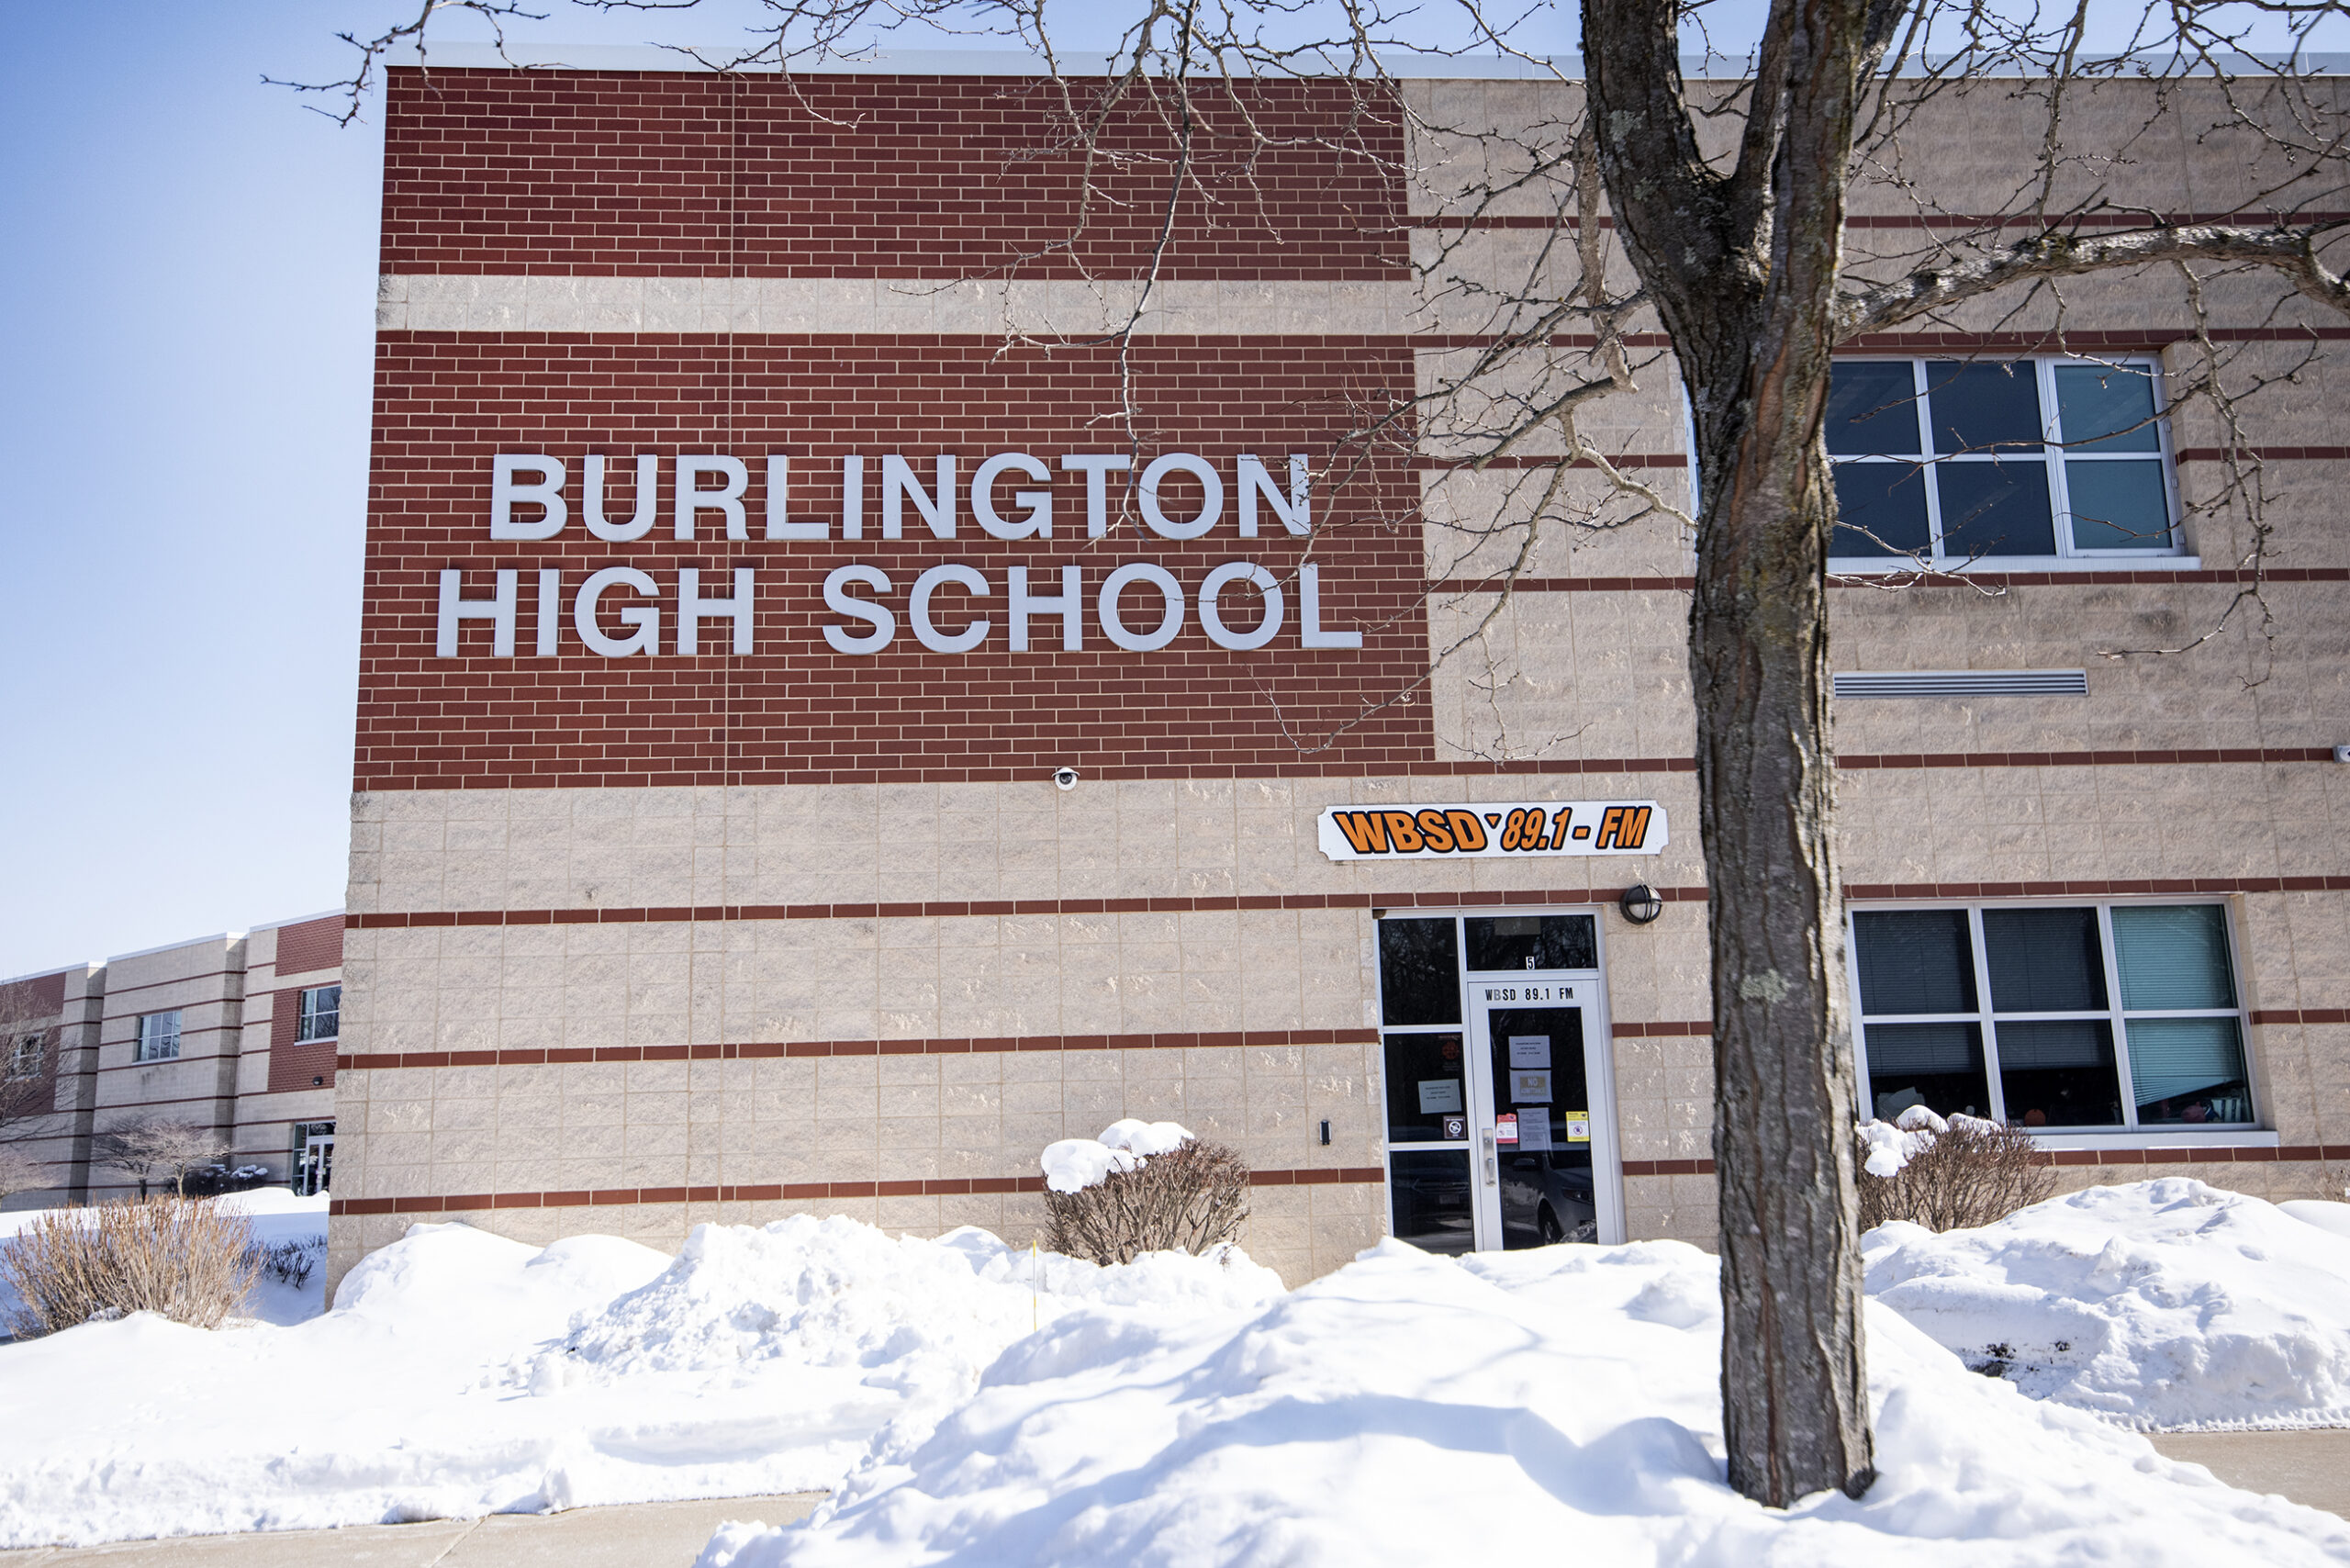 A building with red brick has the words "Burlington High School" on the side.